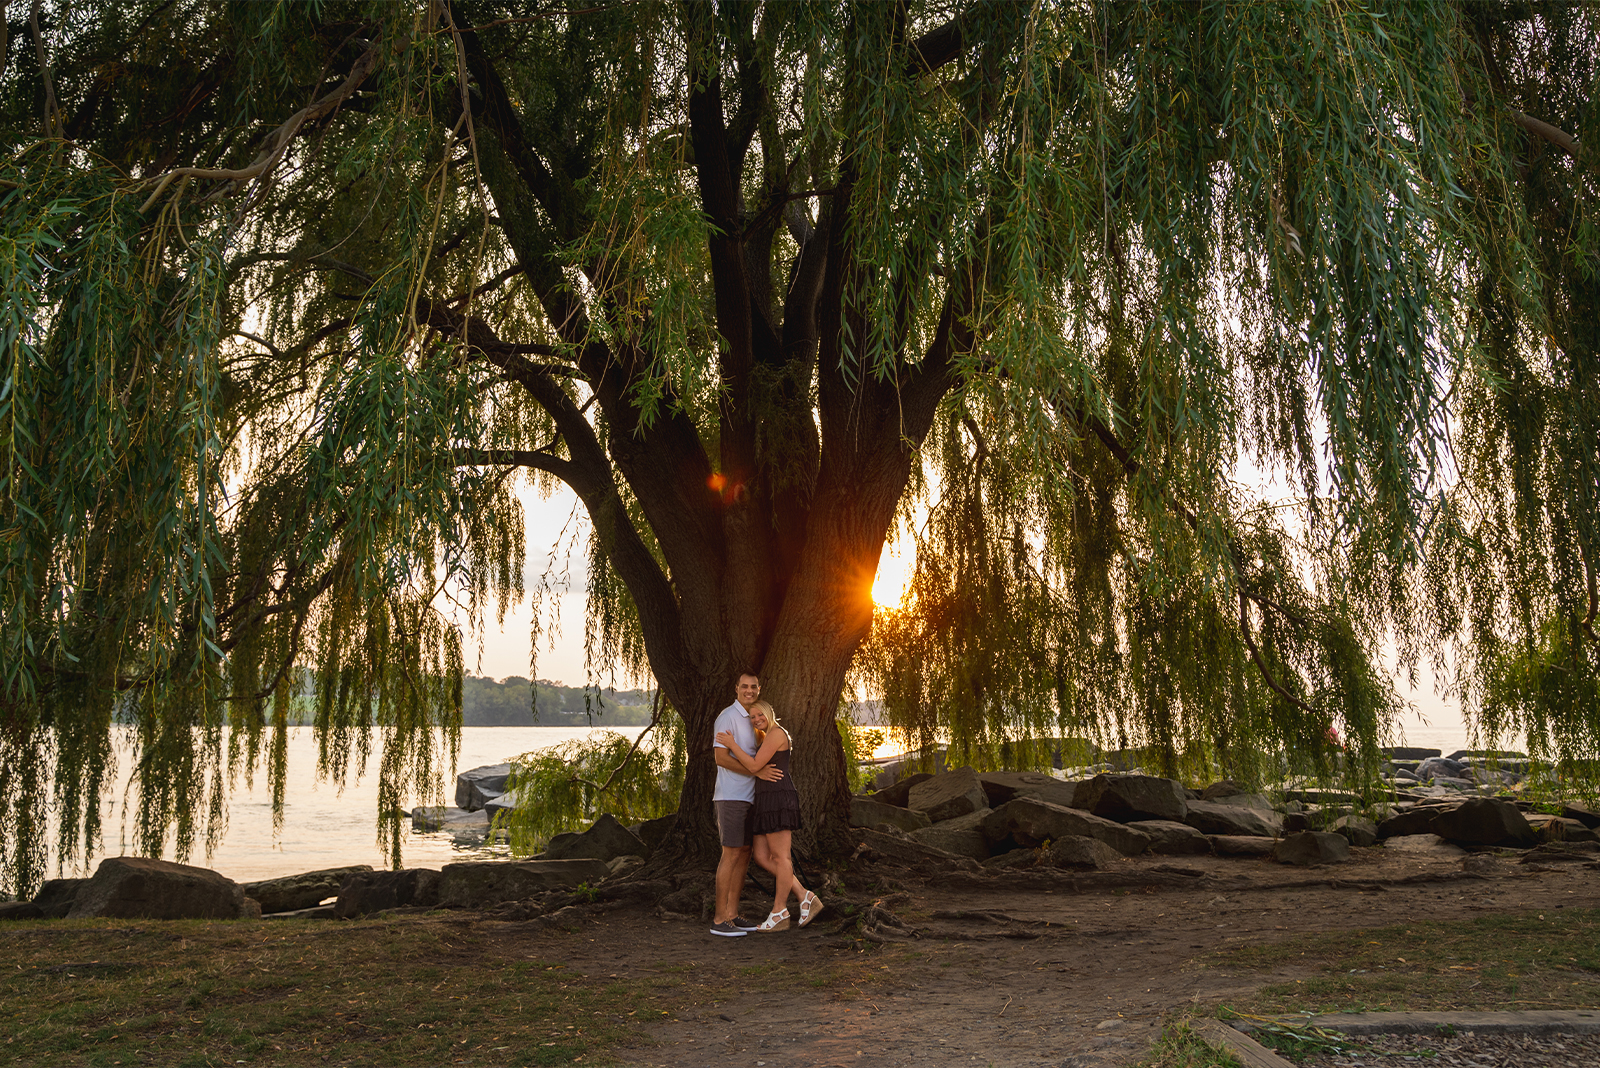 Man and woman fiancee engagement photo, couple portrait, weeping willow tree, sunset, sunset engagement photo, Lake Erie, cute, unique engagement portrait, Edgewater Beach, Cleveland Metroparks